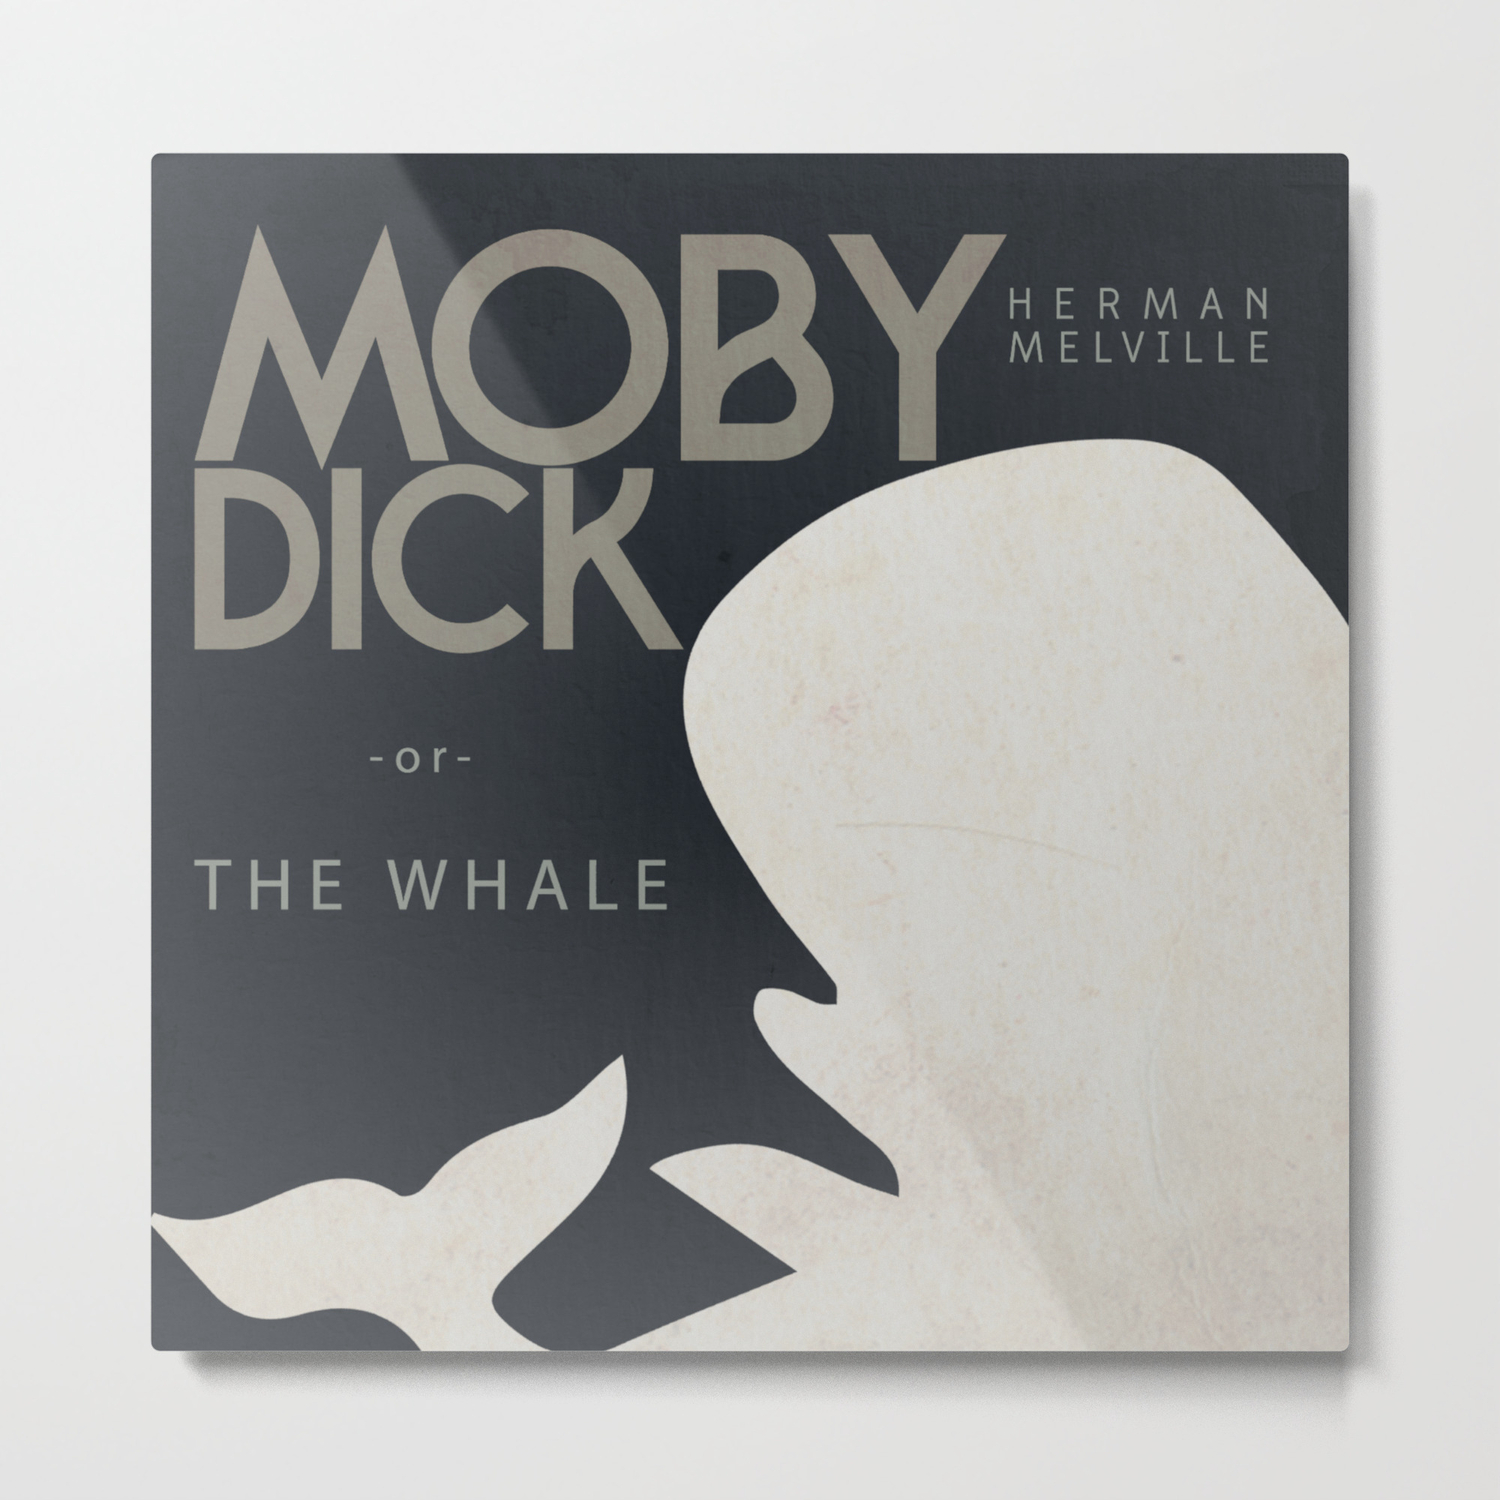 Dollhouse Miniature Moby Dick Book by Herman Melville Printed Pages TIN2006 